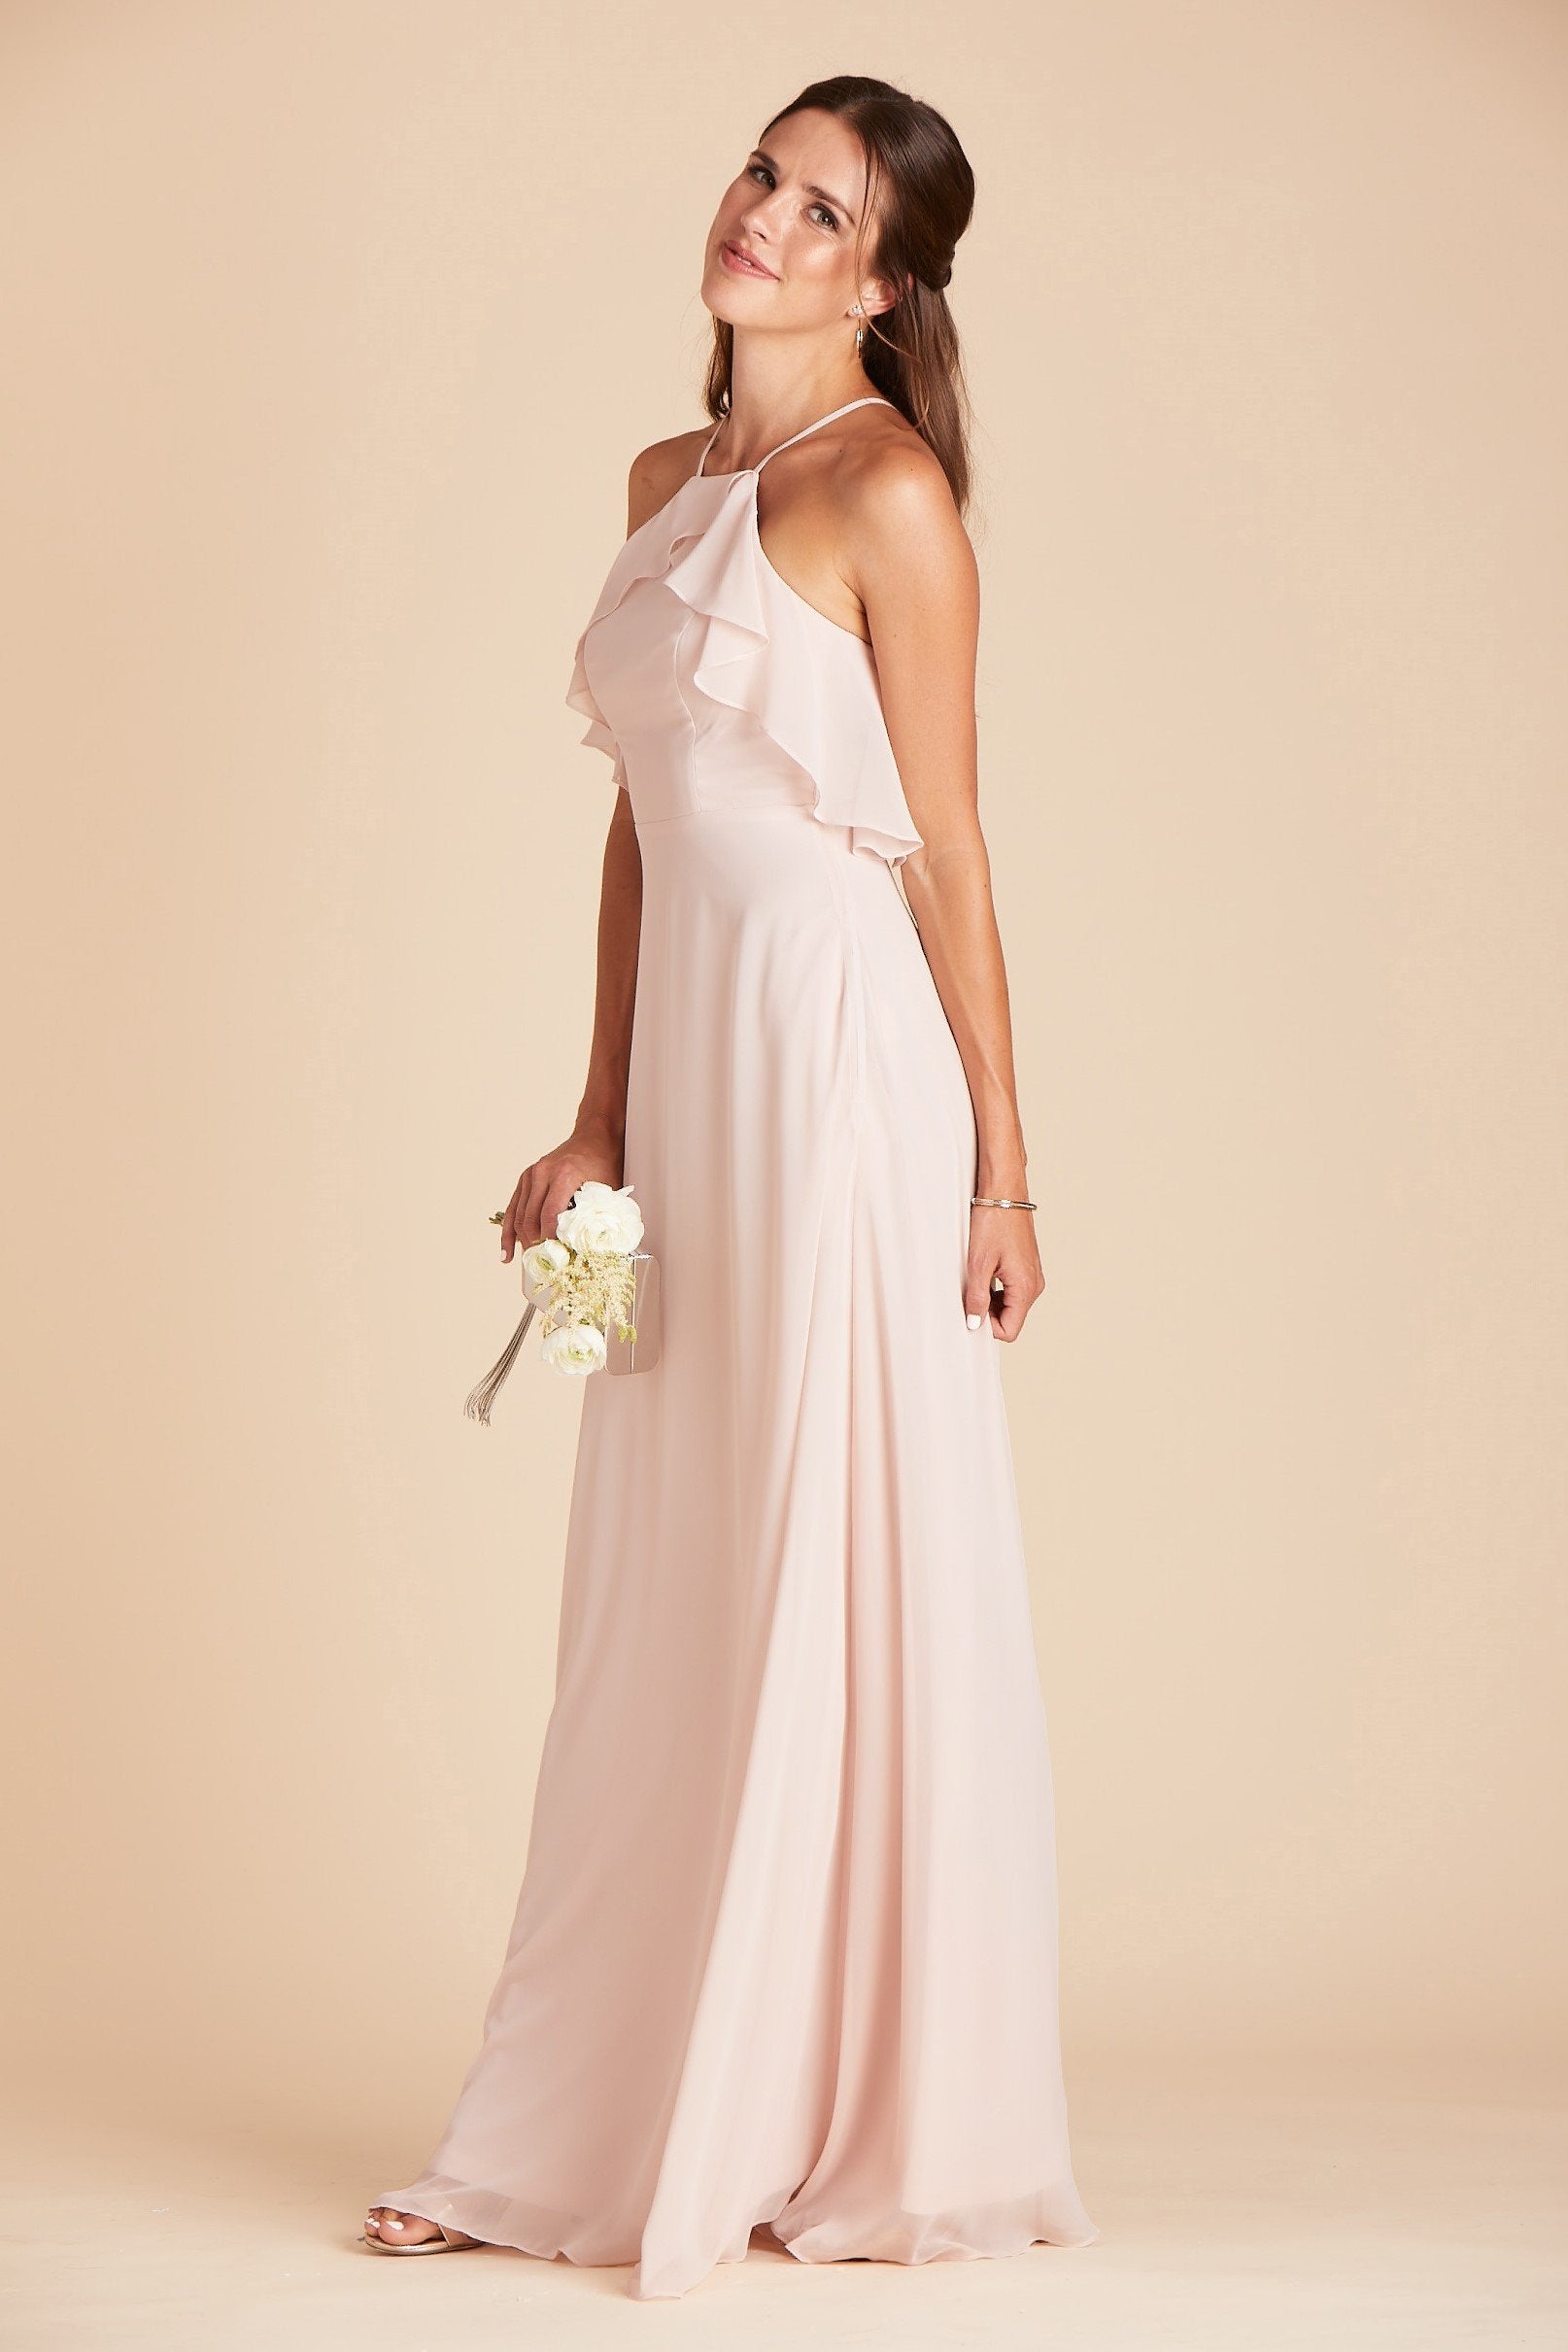 Jules bridesmaid dress in pale blush chiffon by Birdy Grey, side view